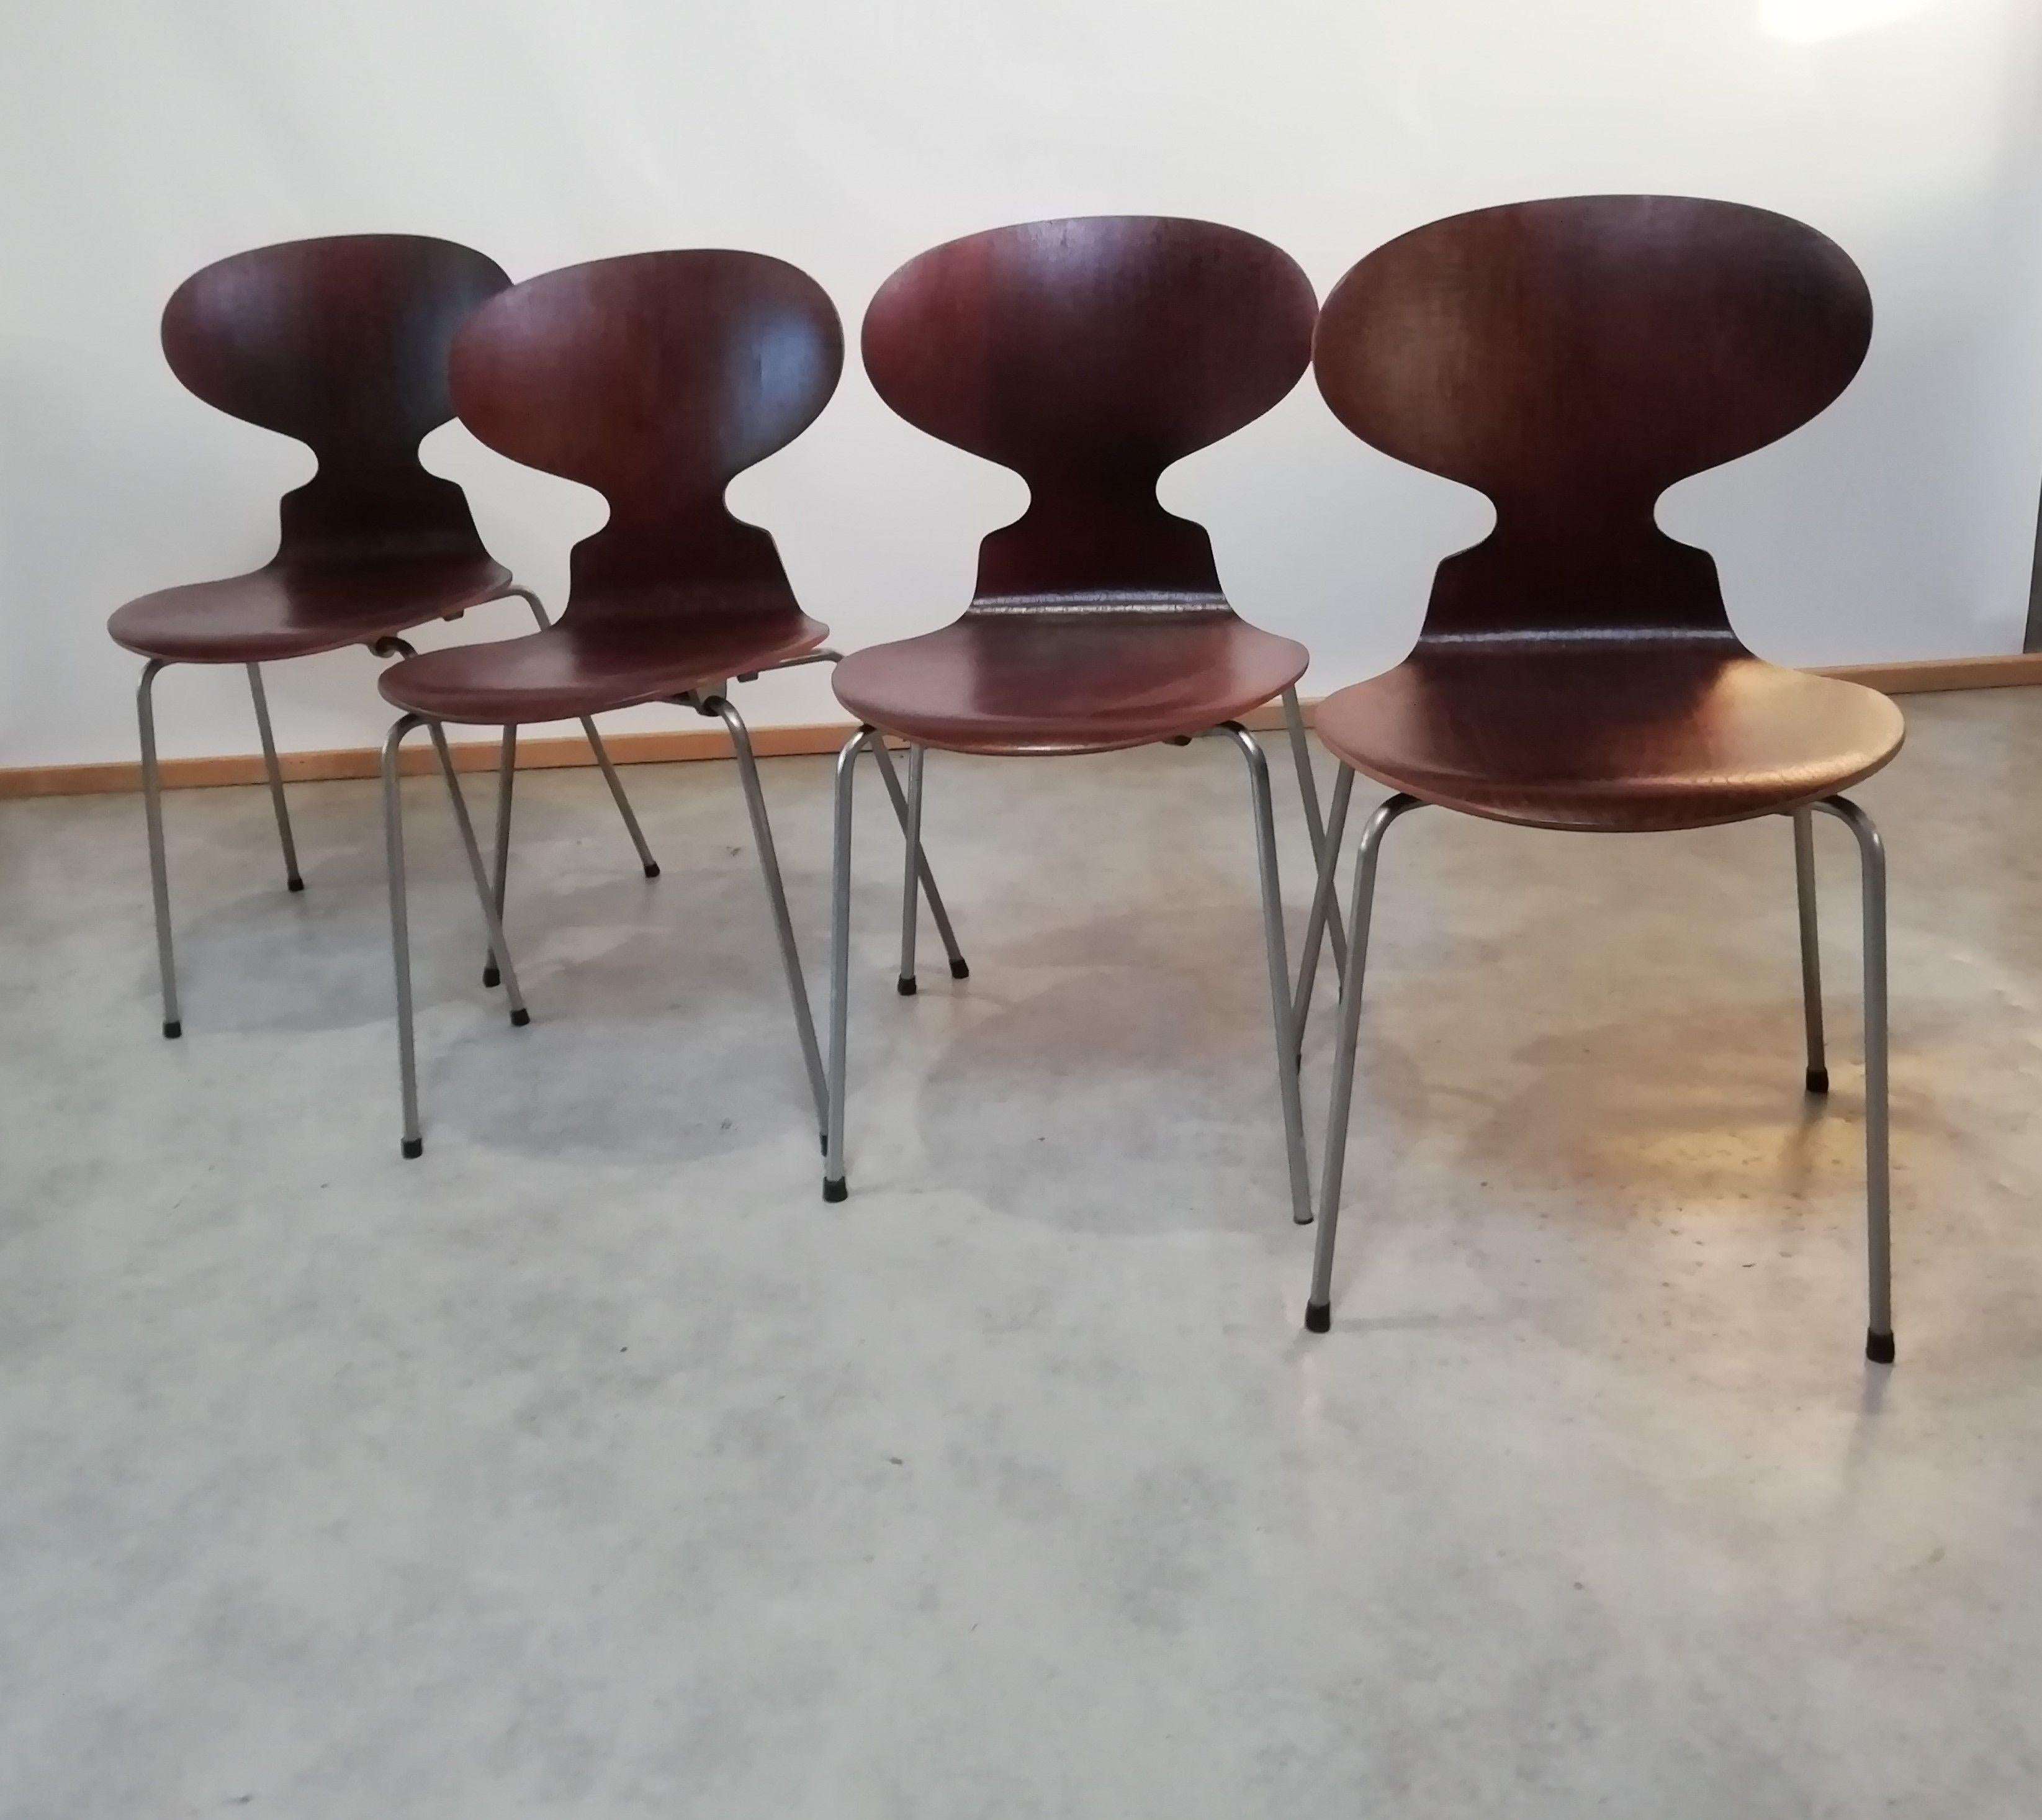 Set of four teak Ant chairs, model 3101, designed by Arne Jacobsen in 1952 and manufactured by Fritz Hansen in the 50's. Chairs were carefully restored and oiled and tehy are in beutiful vintage condition.